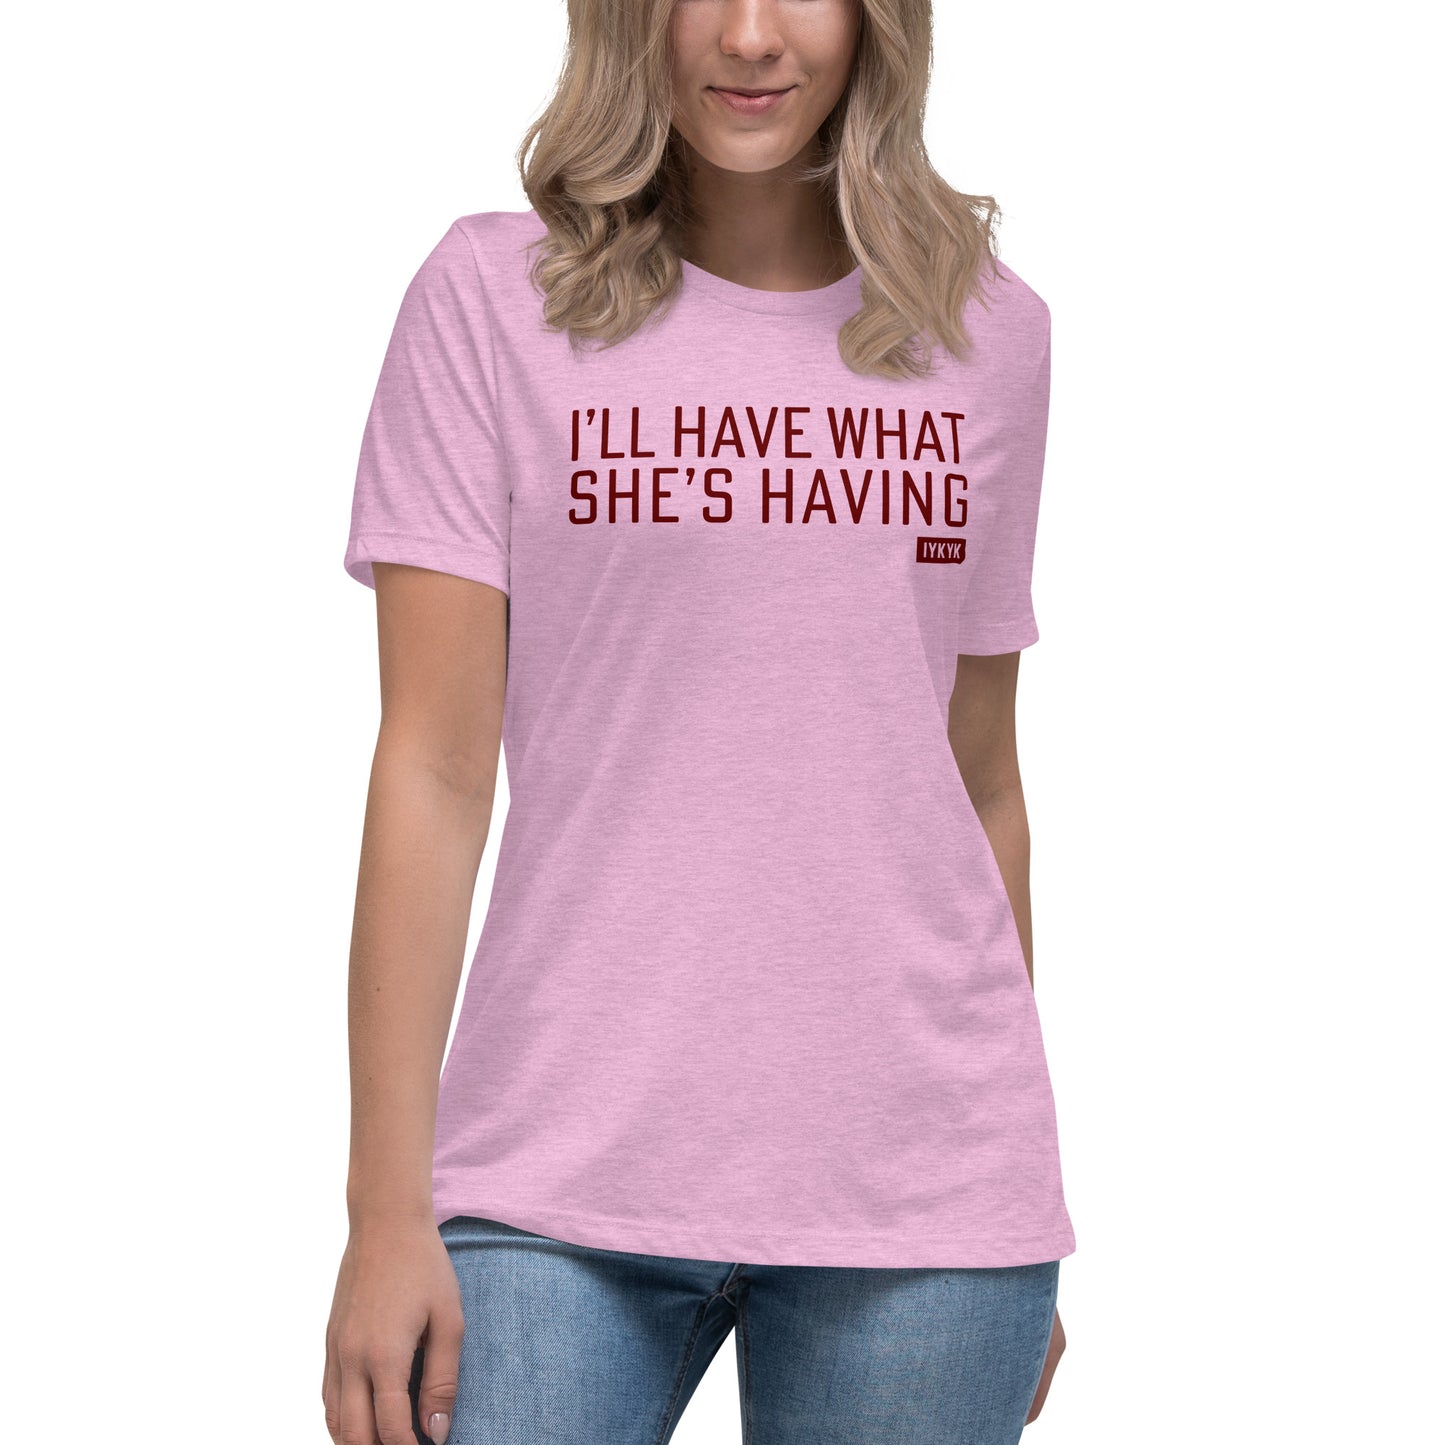 Premium Everyday I'll Have What She's Having When Harry Met Sally Tee